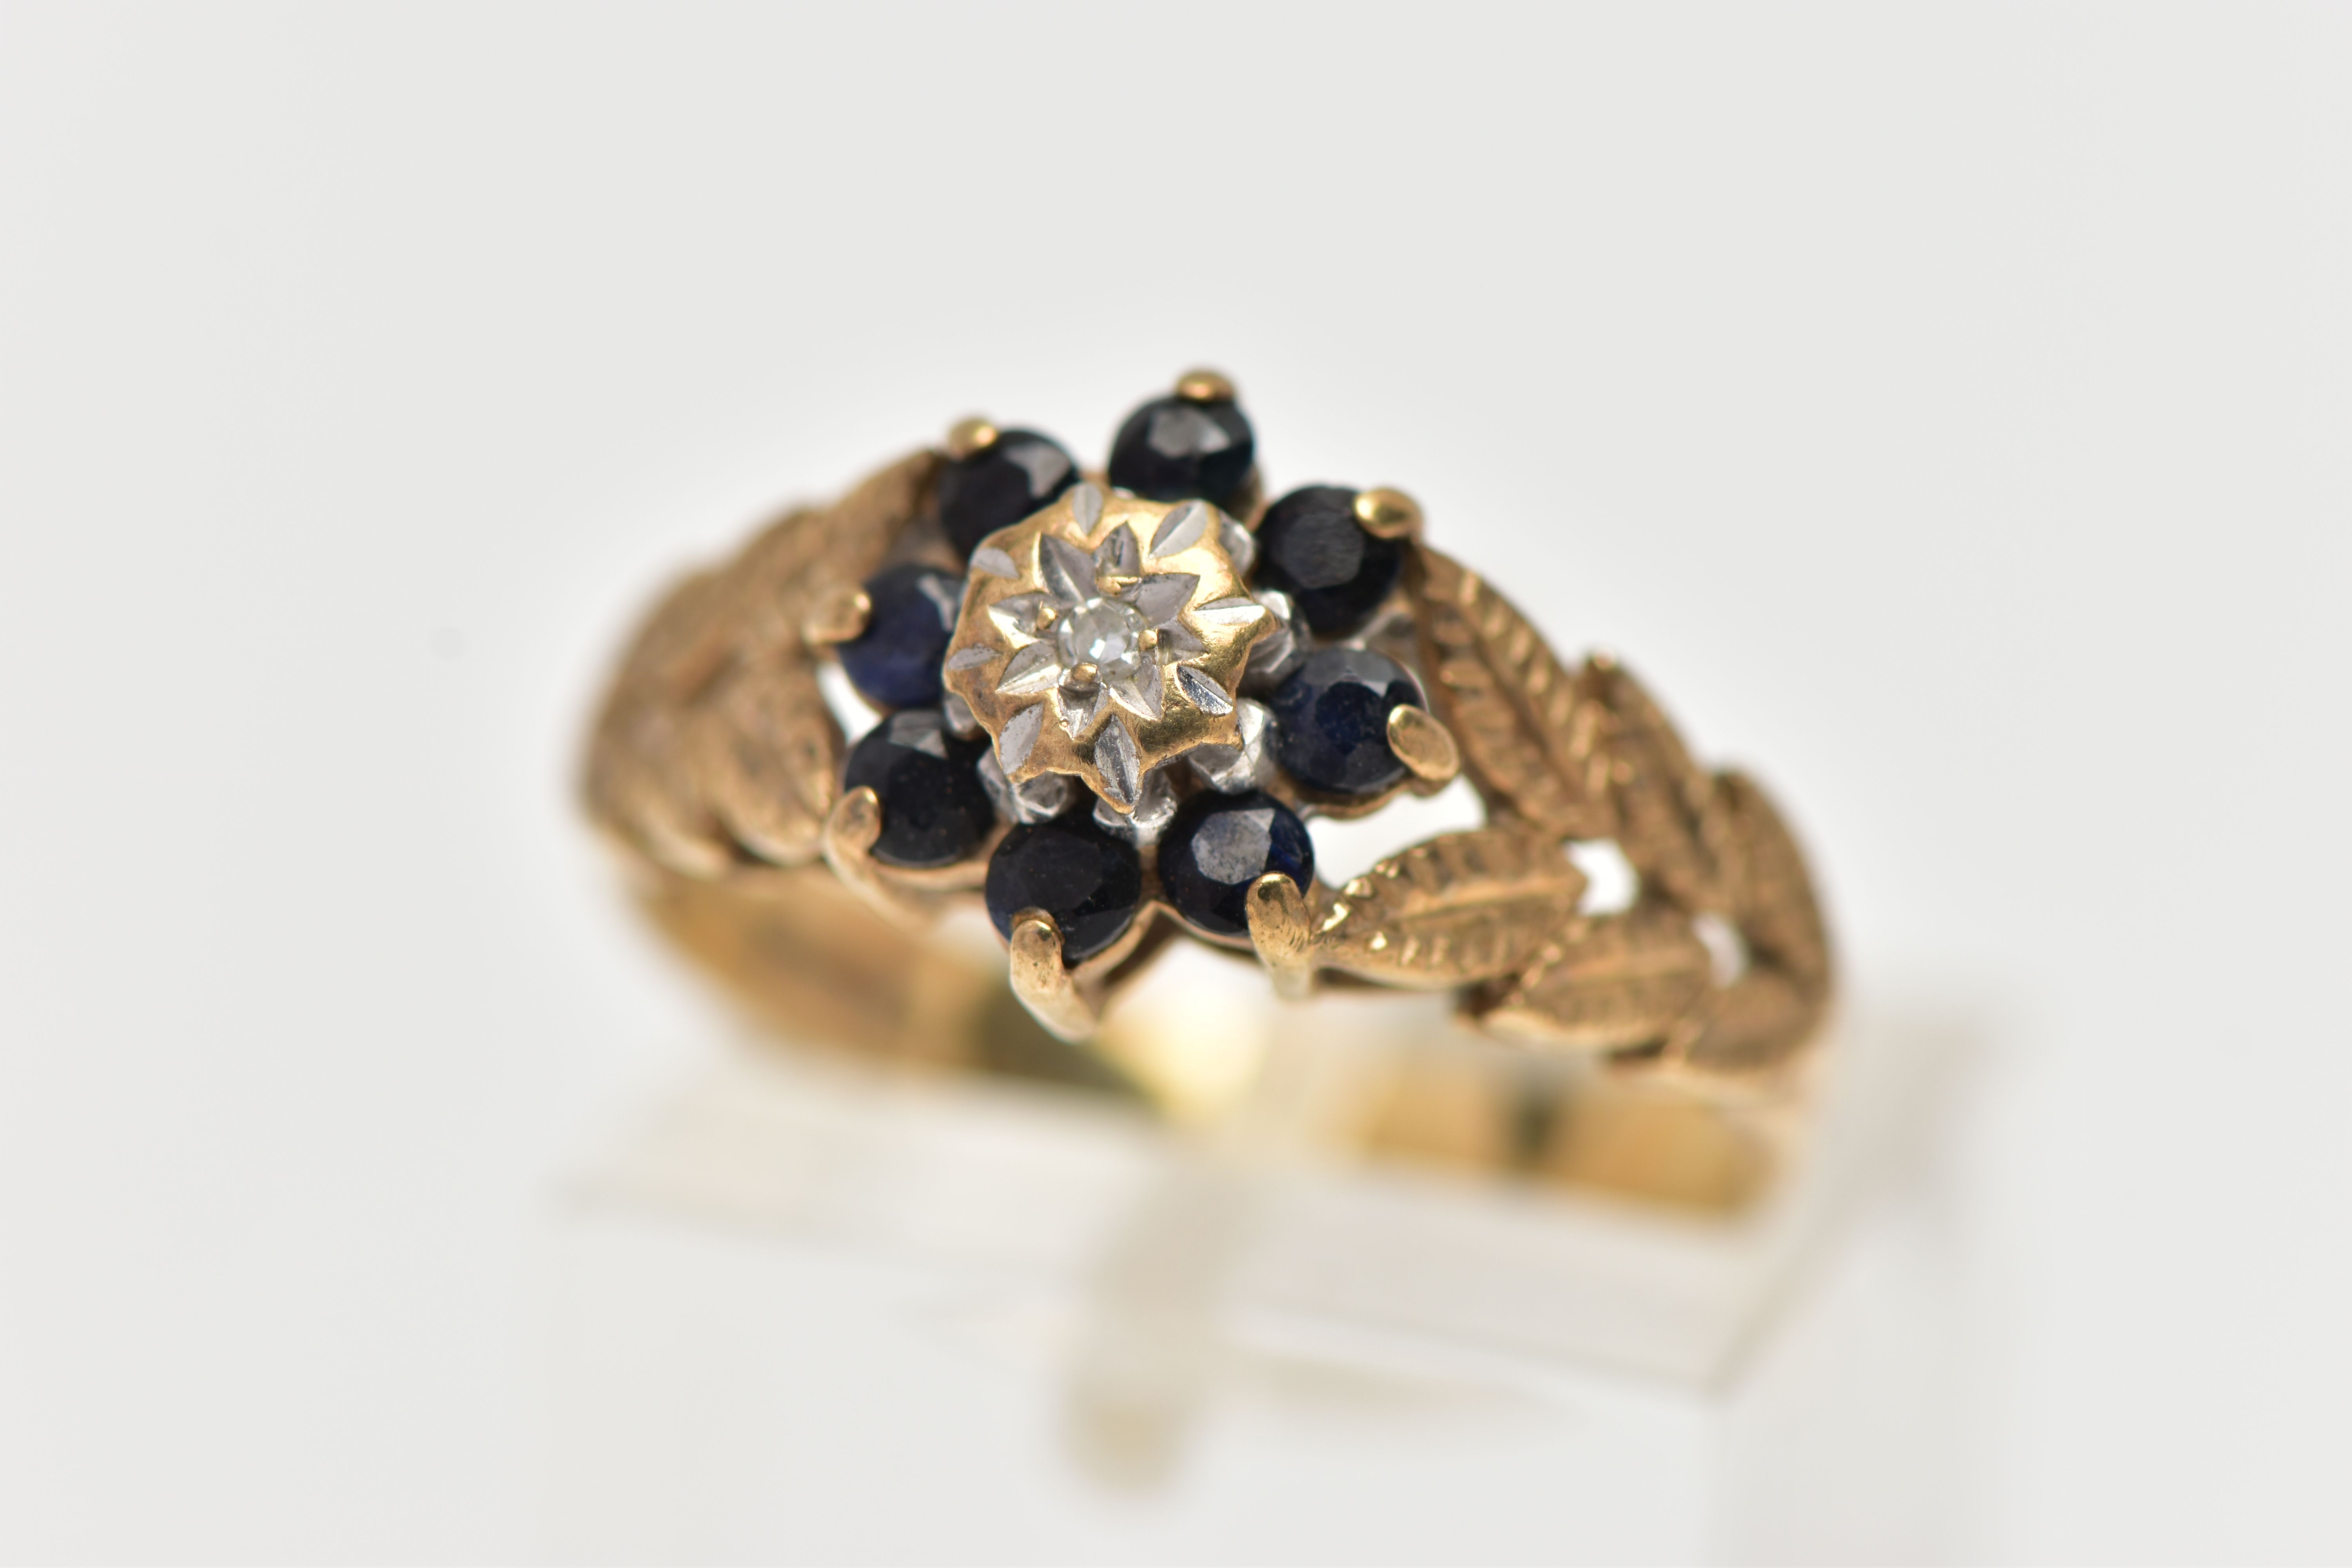 A 9CT GOLD DIAMOND AND SAPPHIRE CLUSTER RING, the illusion set single cut diamond, within a circular